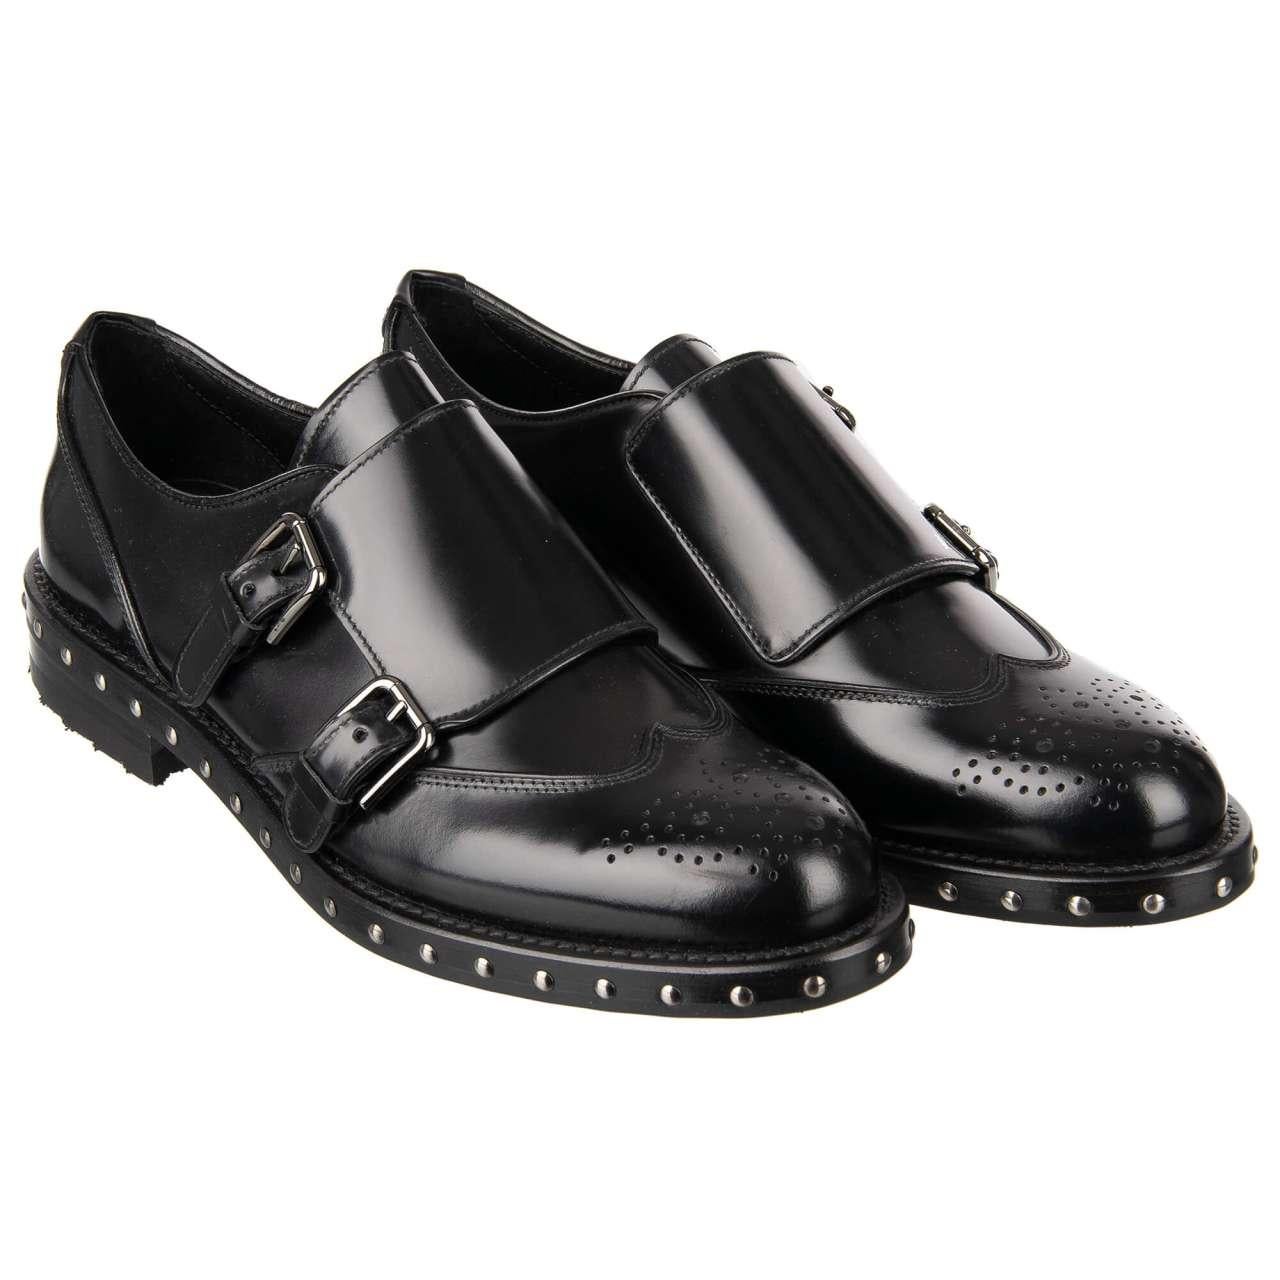 - Studded leather shoes BOY with monk straps in black by DOLCE & GABBANA - MADE IN ITALY - New with Box - Model: CN0029-AC801-80999 - Material: 100% Calf leather - Sole: Rubber - Color: Black - Heel: 3 cm - Sizes (appr. values): - EUR 37,5 / US 7,5: